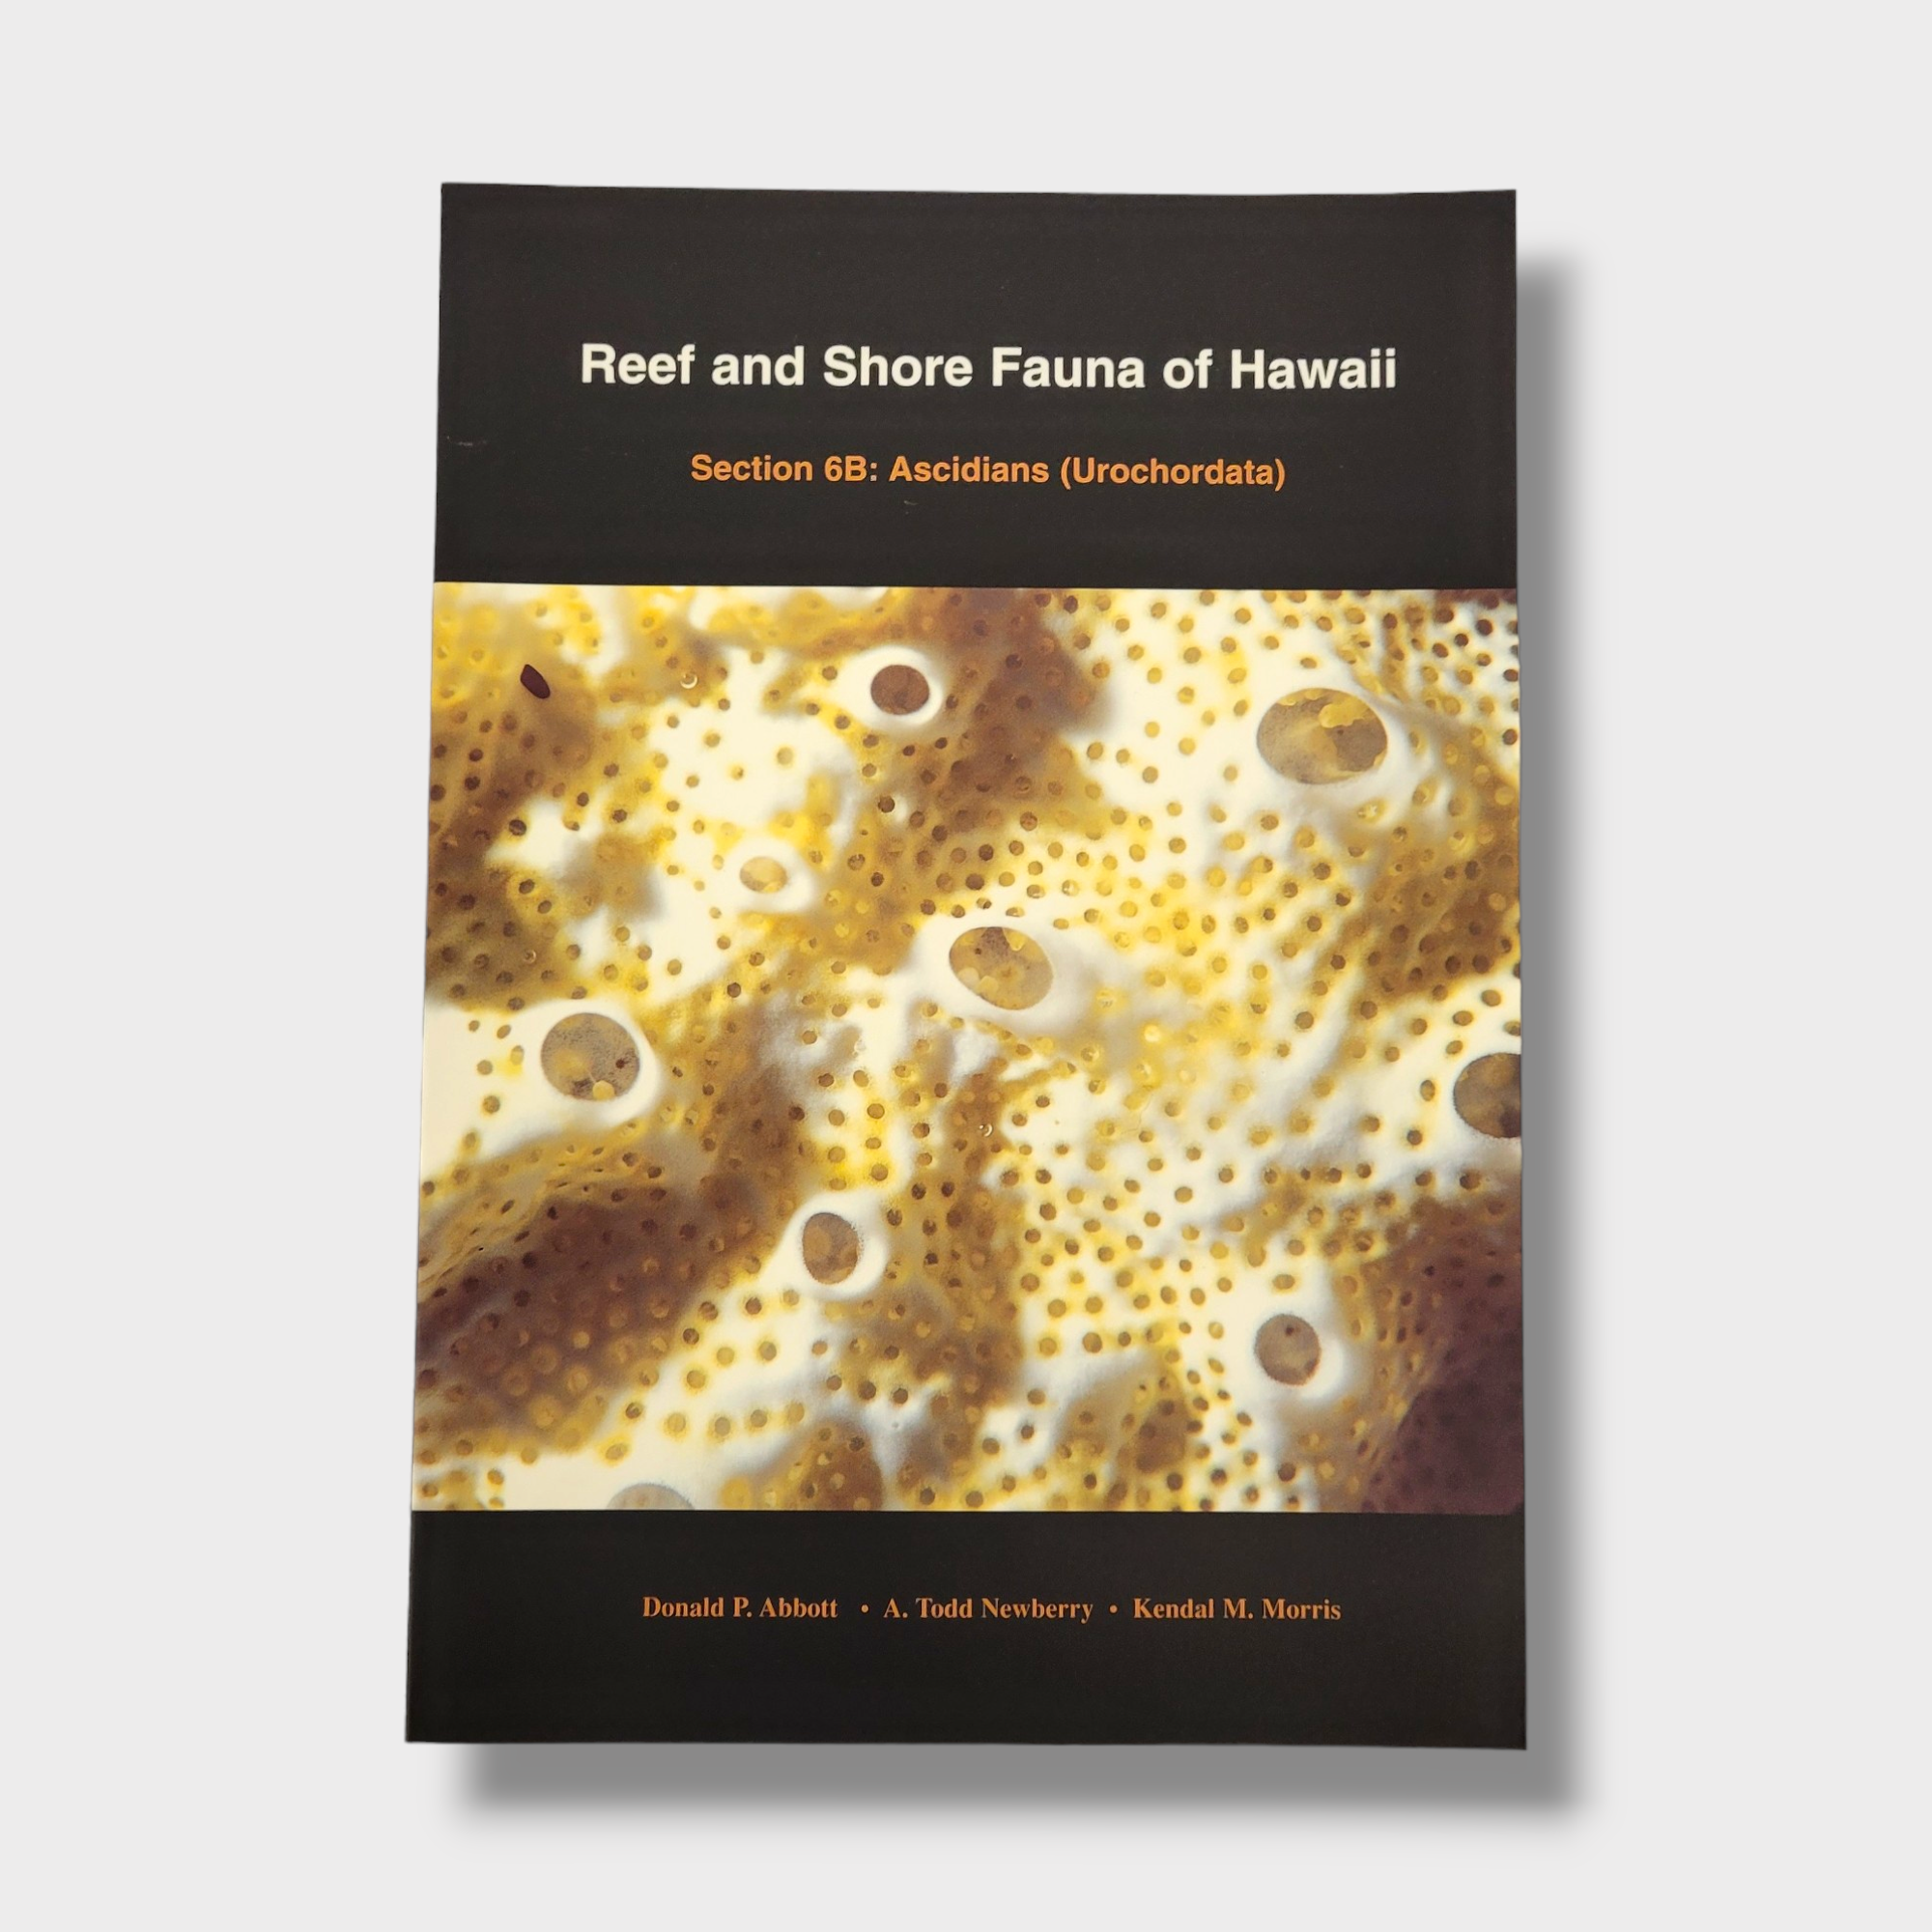 Reef and Shore Fauna of Hawaii, Section 6B: Ascidians (Urochordata)